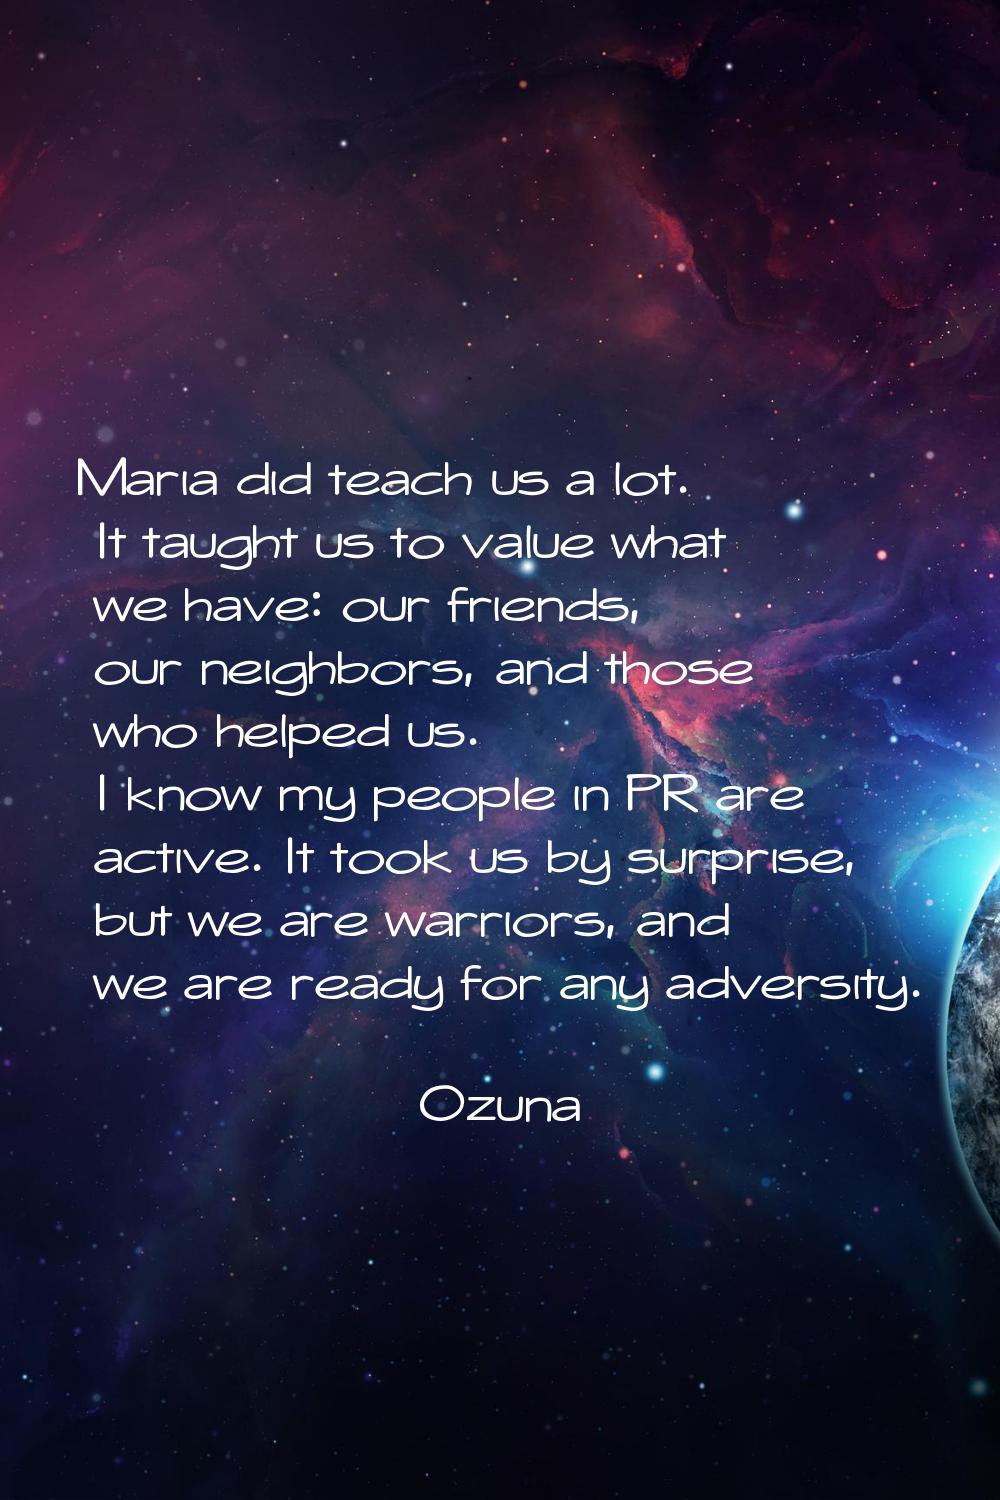 Maria did teach us a lot. It taught us to value what we have: our friends, our neighbors, and those